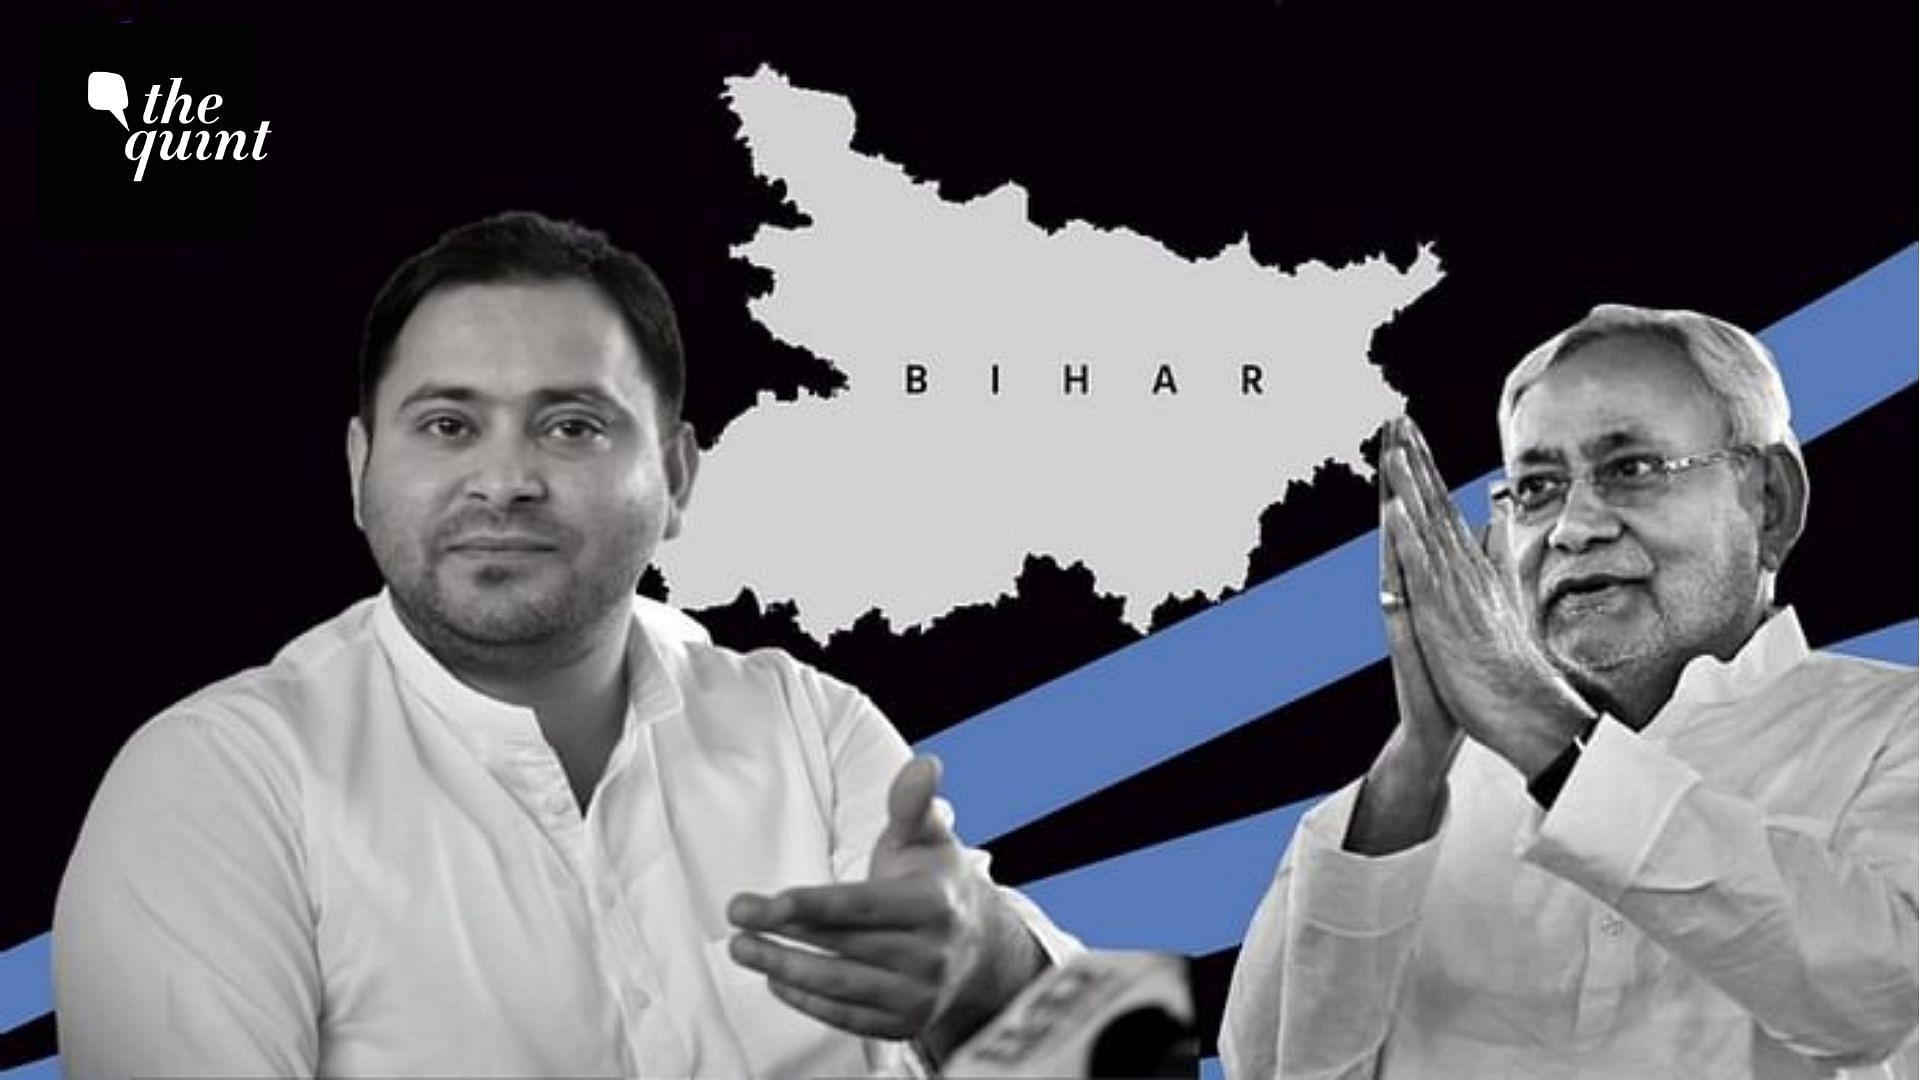 In the world’s first biggest electoral exercise amid the COVID-19 pandemic, Bihar is all set to go to polls in three phases in October and November.